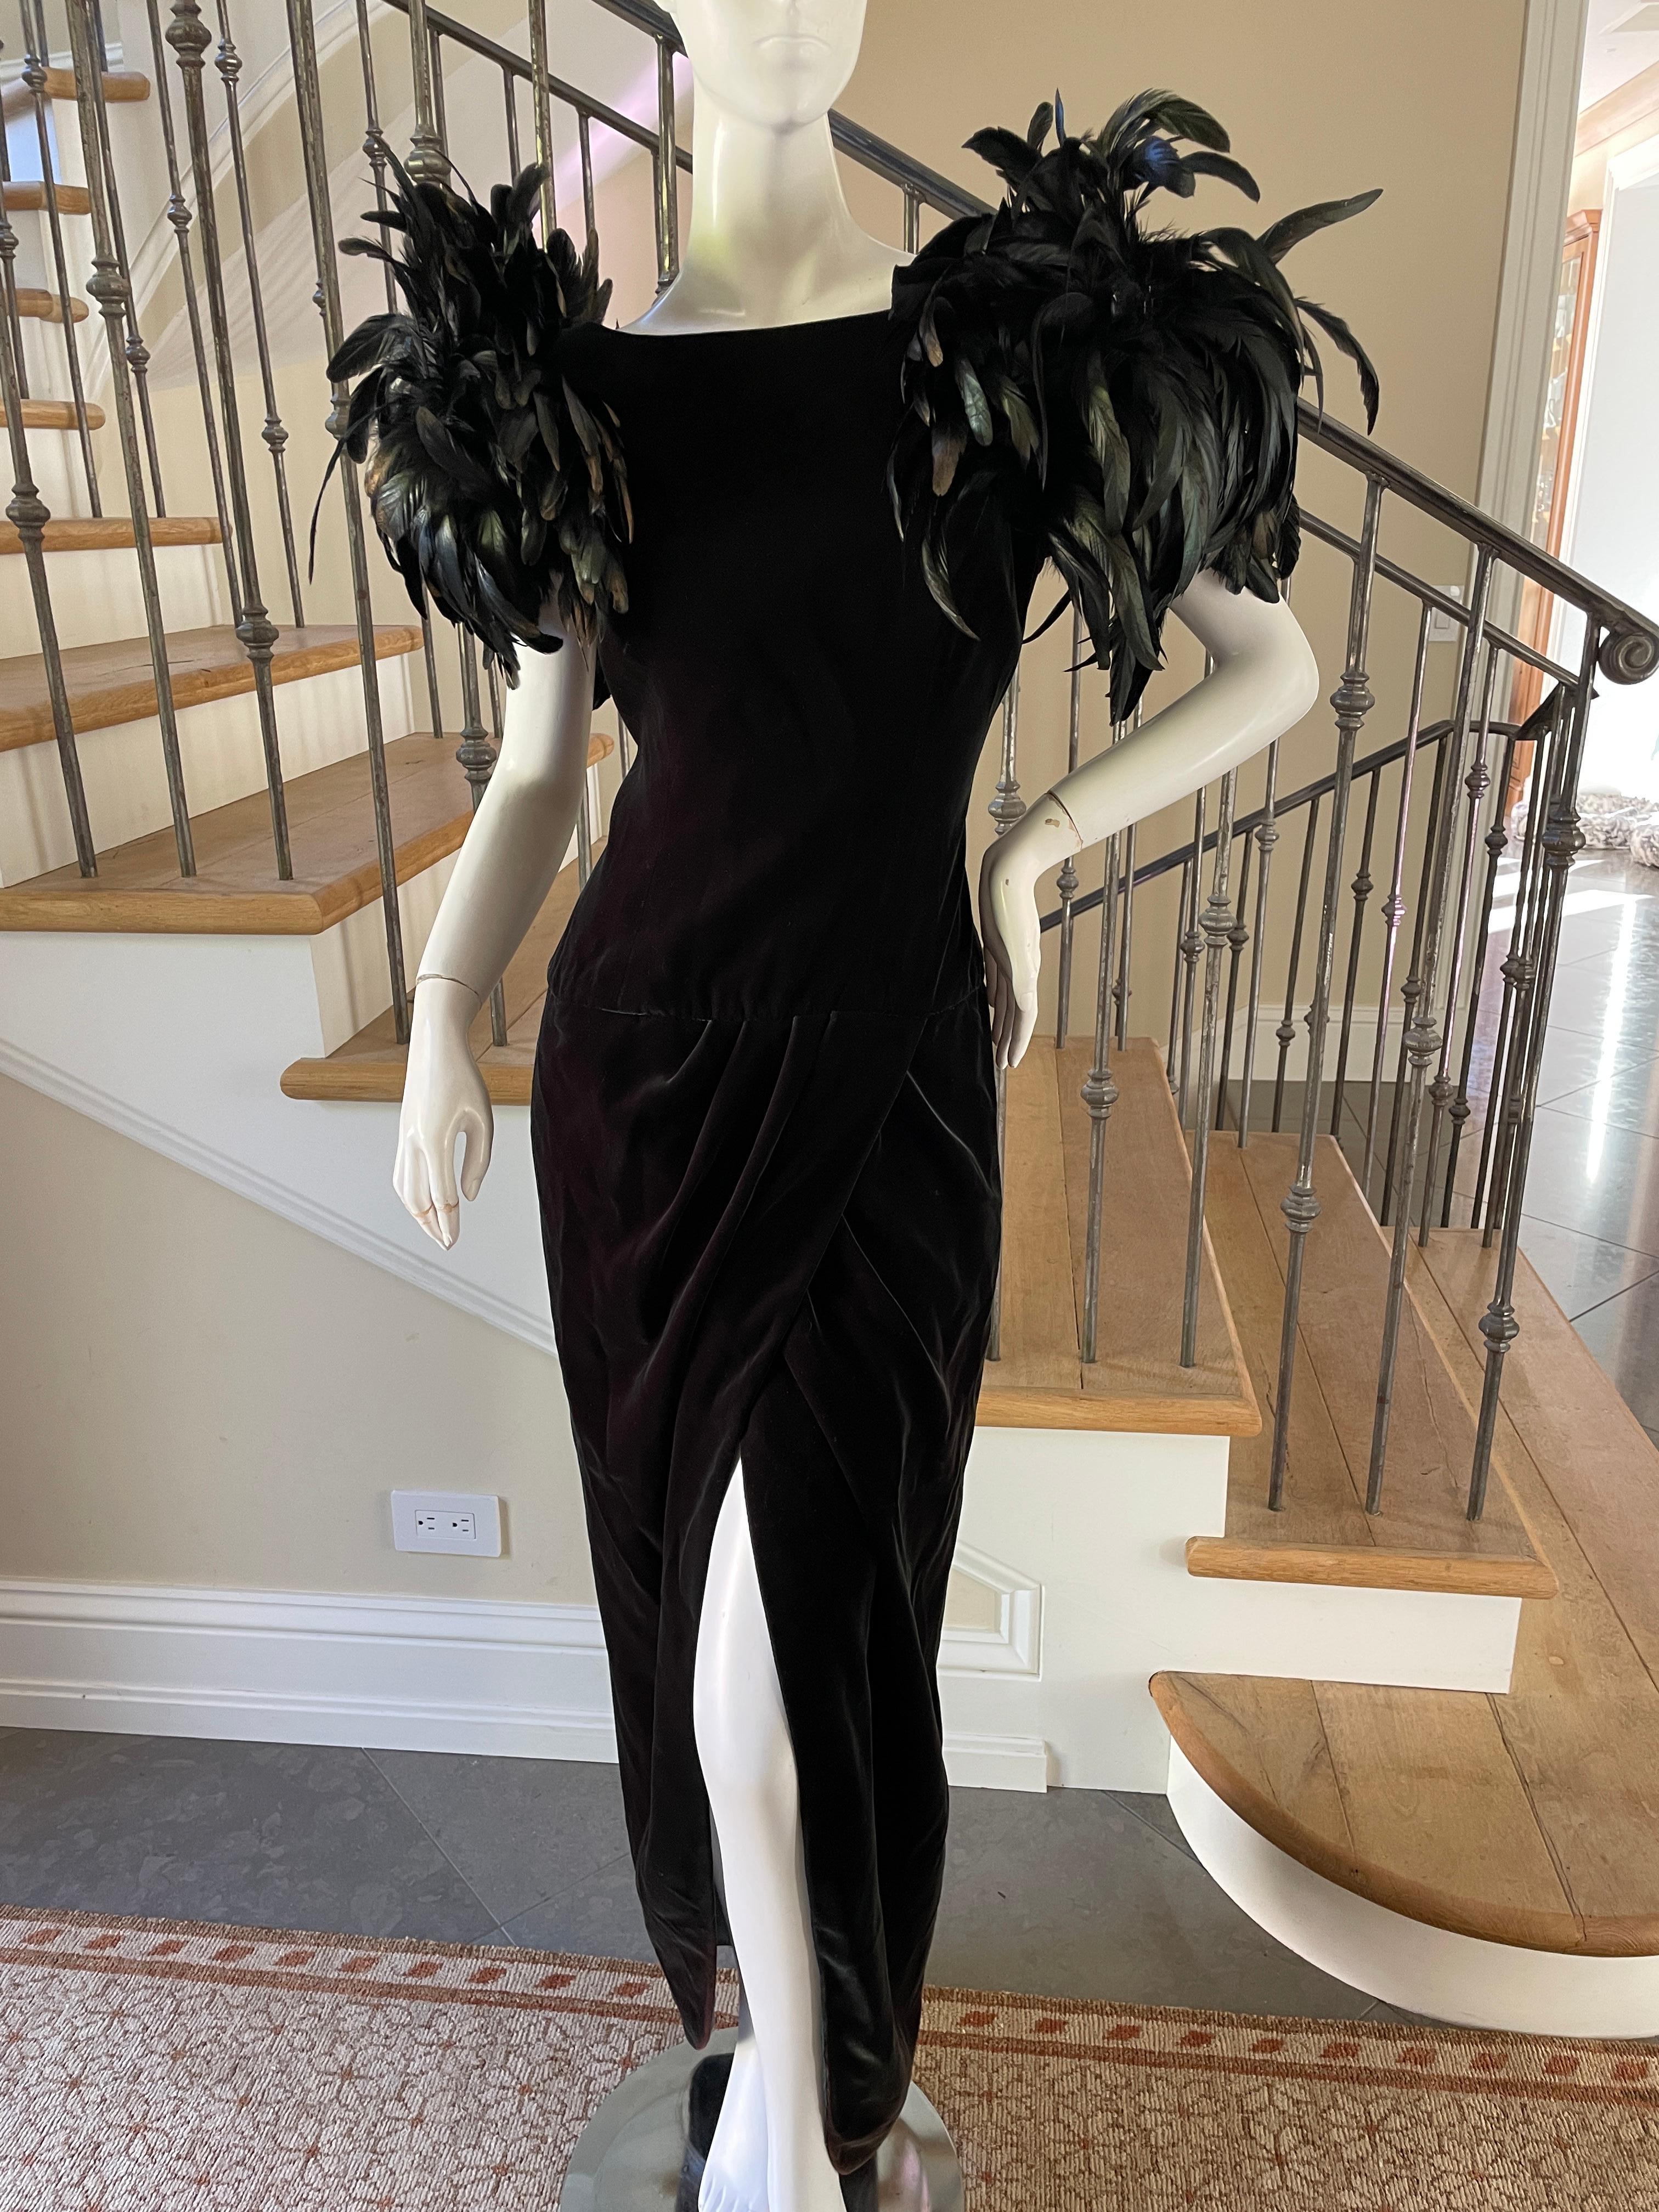 Victor Costa for I Magnin Stunning 1980's Green Velvet Evening Dress with Exaggerated Coq Feather Shoulders.
This is sensational, a real entrance maker, with a high slit, and low cut back.
No size tag, I would estimate it size 6
Bust 39